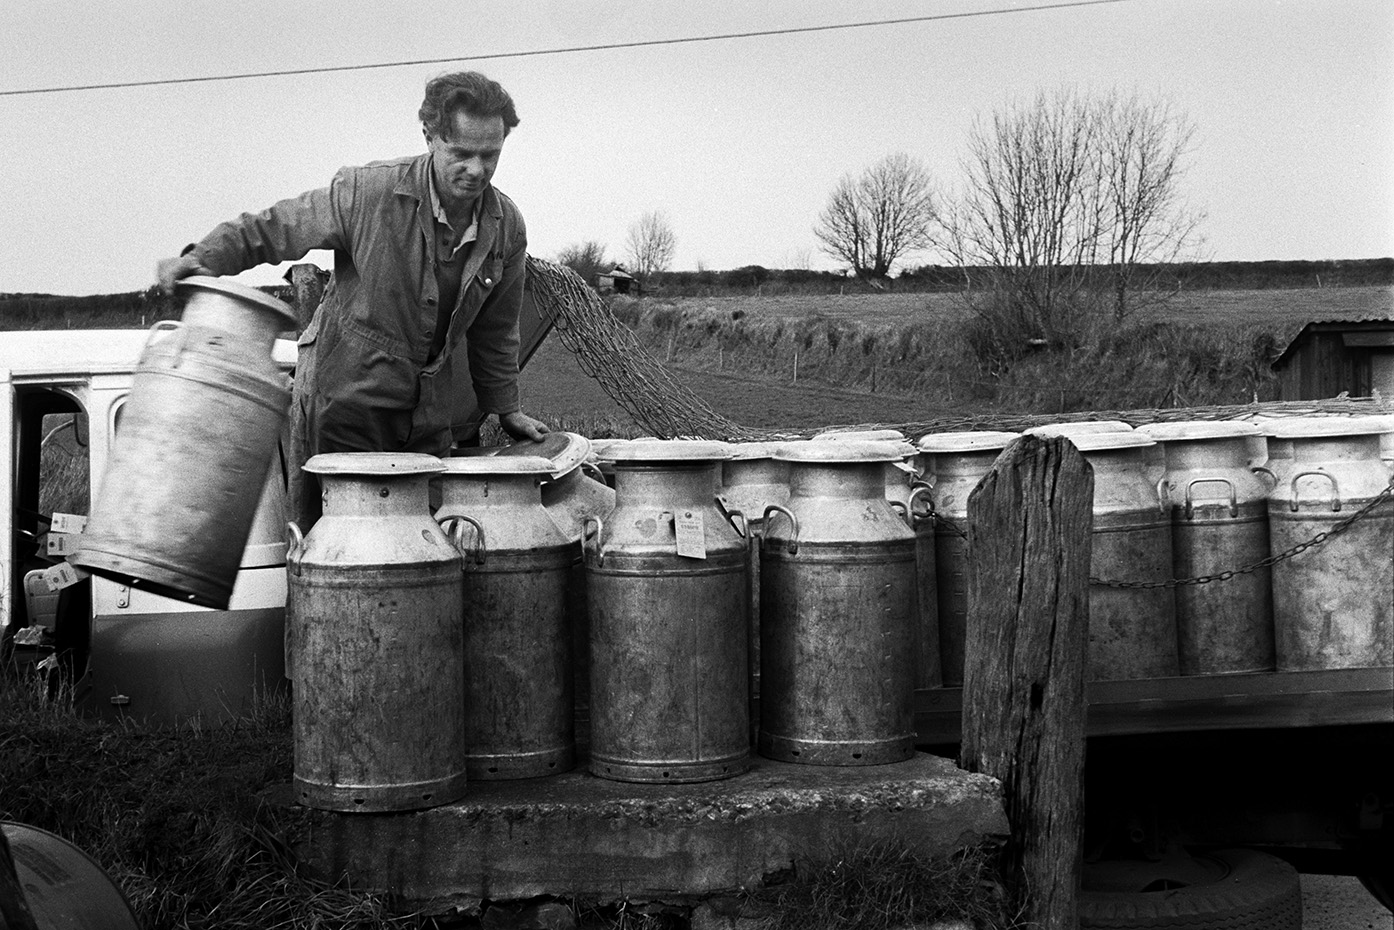 A man loading milk churns onto a milk churn stand by a field at Beaford.